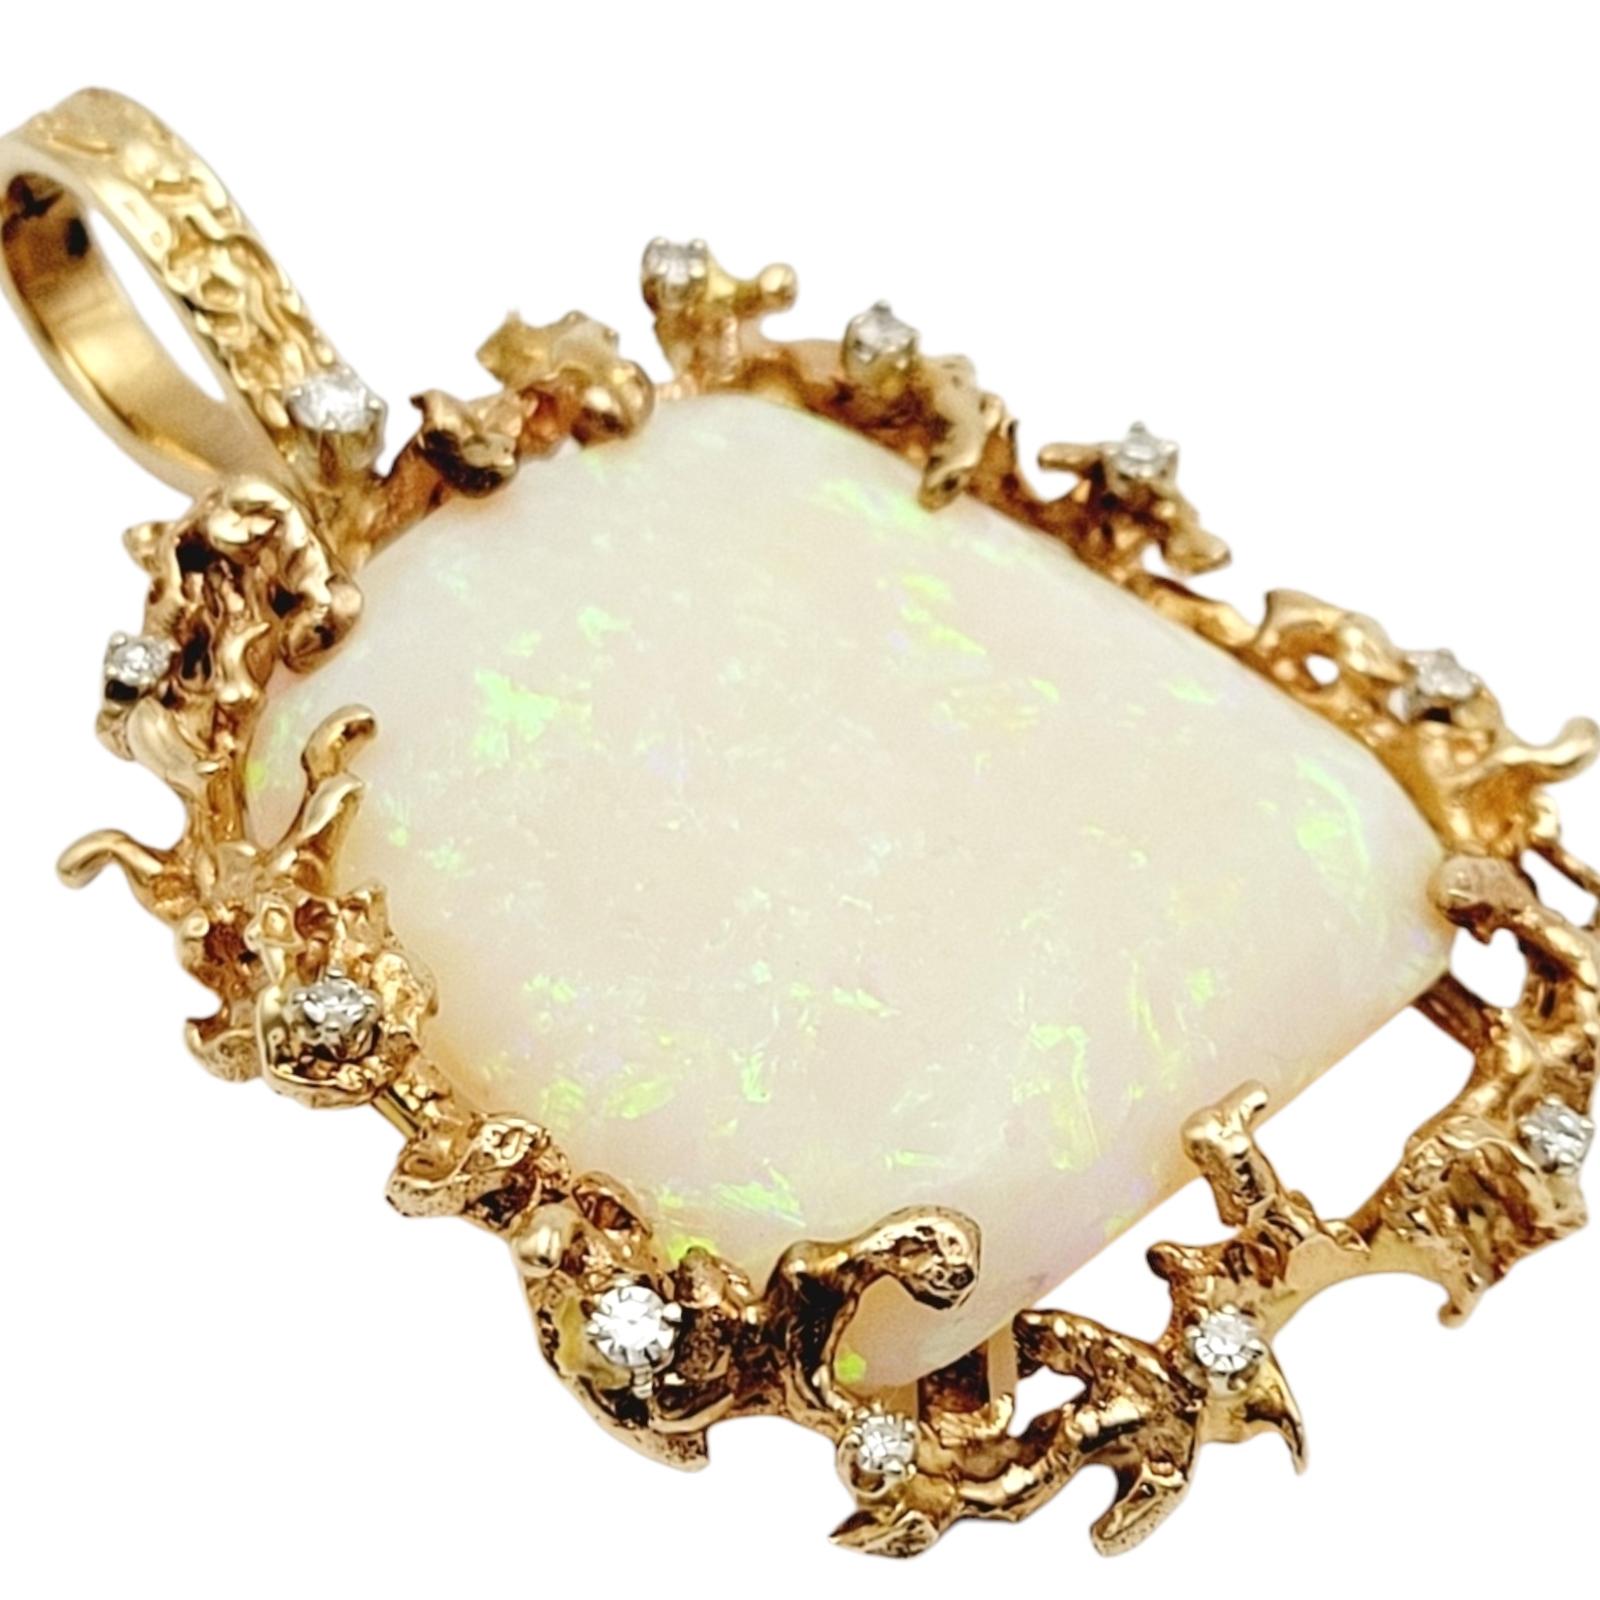 Enhance your jewelry collection with this exquisite pendant featuring captivating white opal and dazzling diamonds. This one-of-a-kind piece is a true testament to elegance and sophistication.
The pendant showcases a magnificent 23.63-carat white